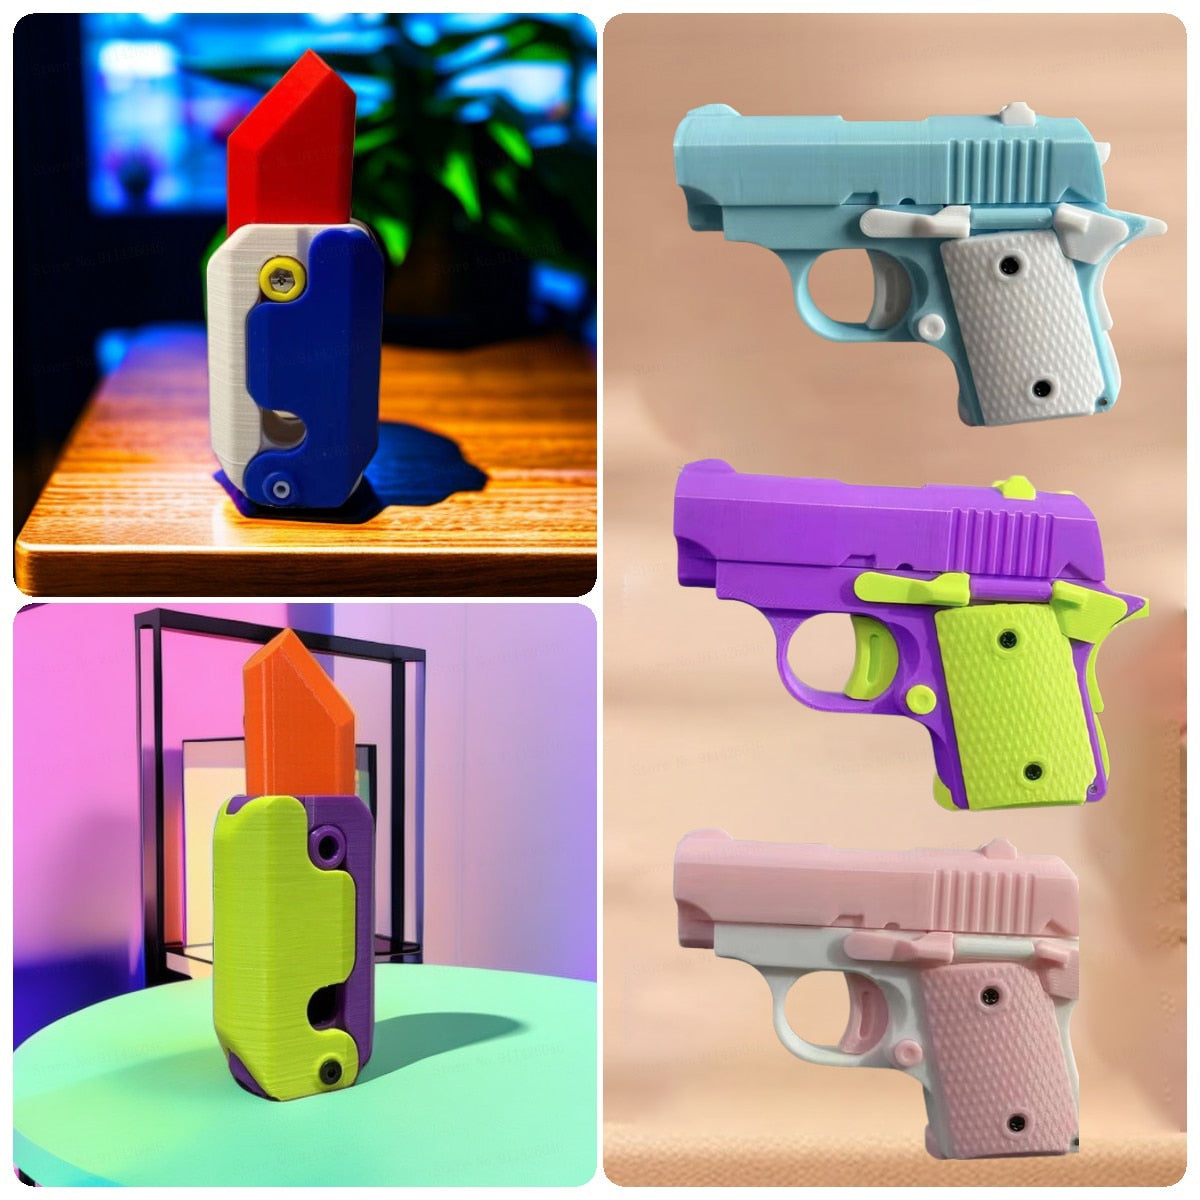 3d Printed Model Gravity Straight Jump Mini Toy Gun Non-firing Bullet Cub Radish Toy Knife Kids Stress Relief Toy Christmas Gift ShopOnlyDeal